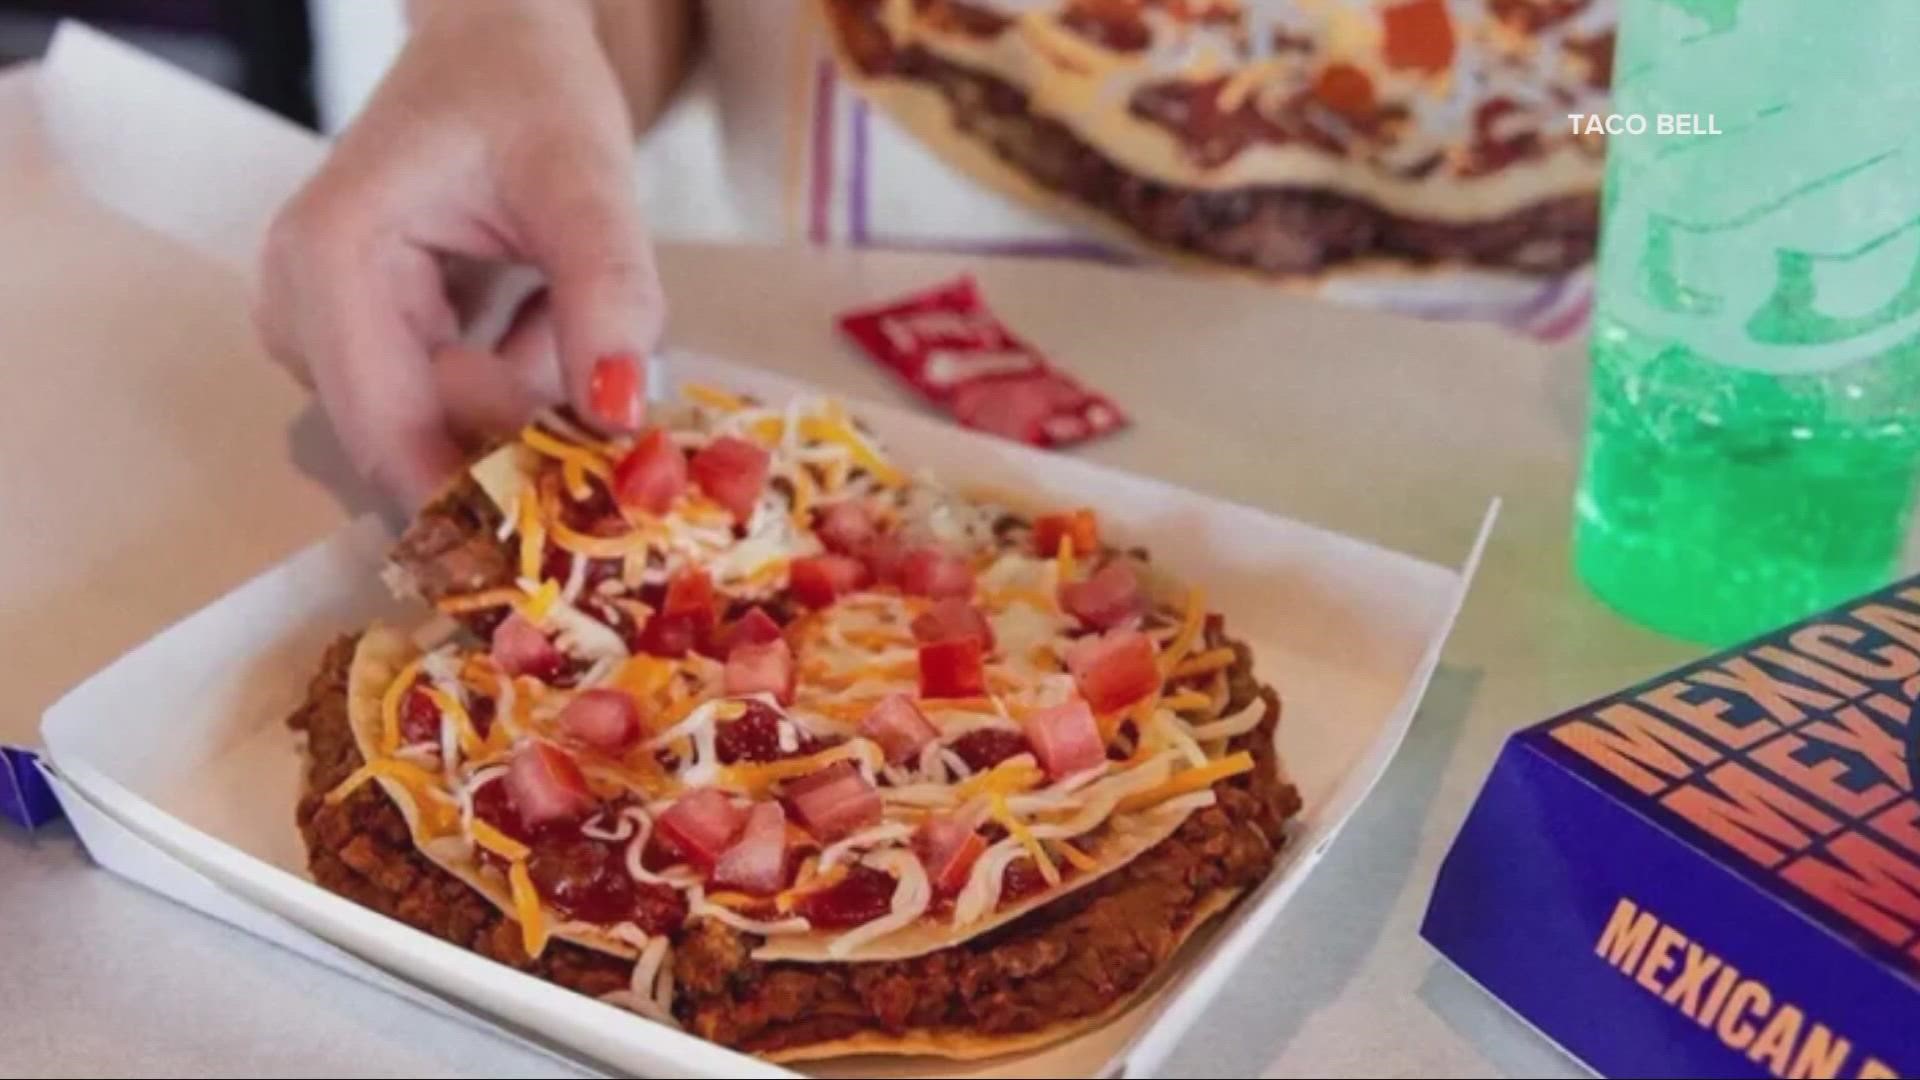 It's almost time... Taco Bell has announced that its popular Mexican Pizza will return to menus nationwide starting September 15, 2022.